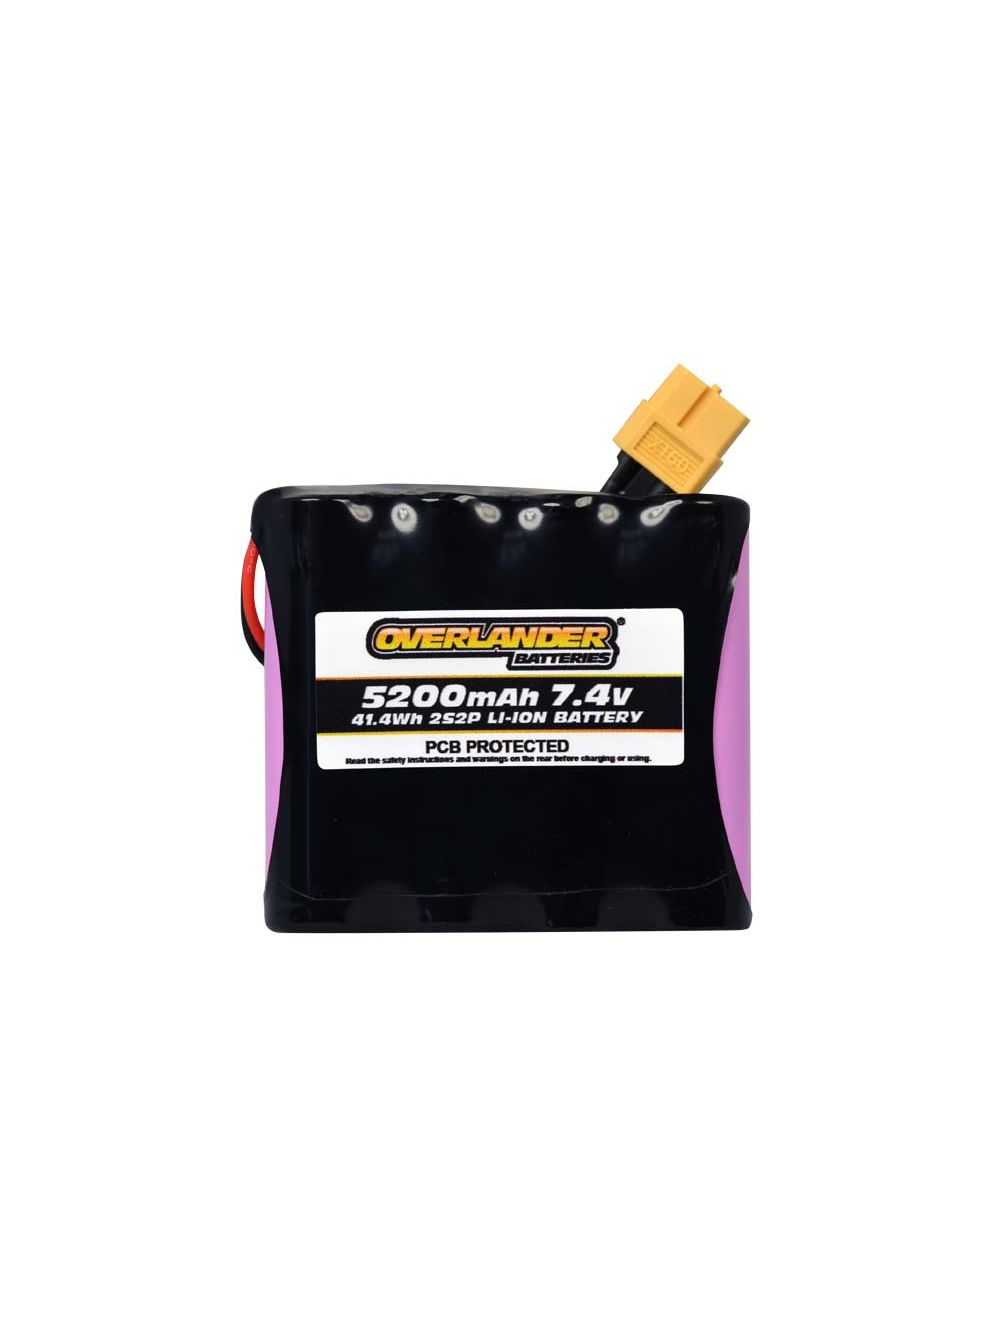 Overlander 5200mAh 2S2P 7.4V Li-Ion Rechargeable Battery with PCB Flat 3306